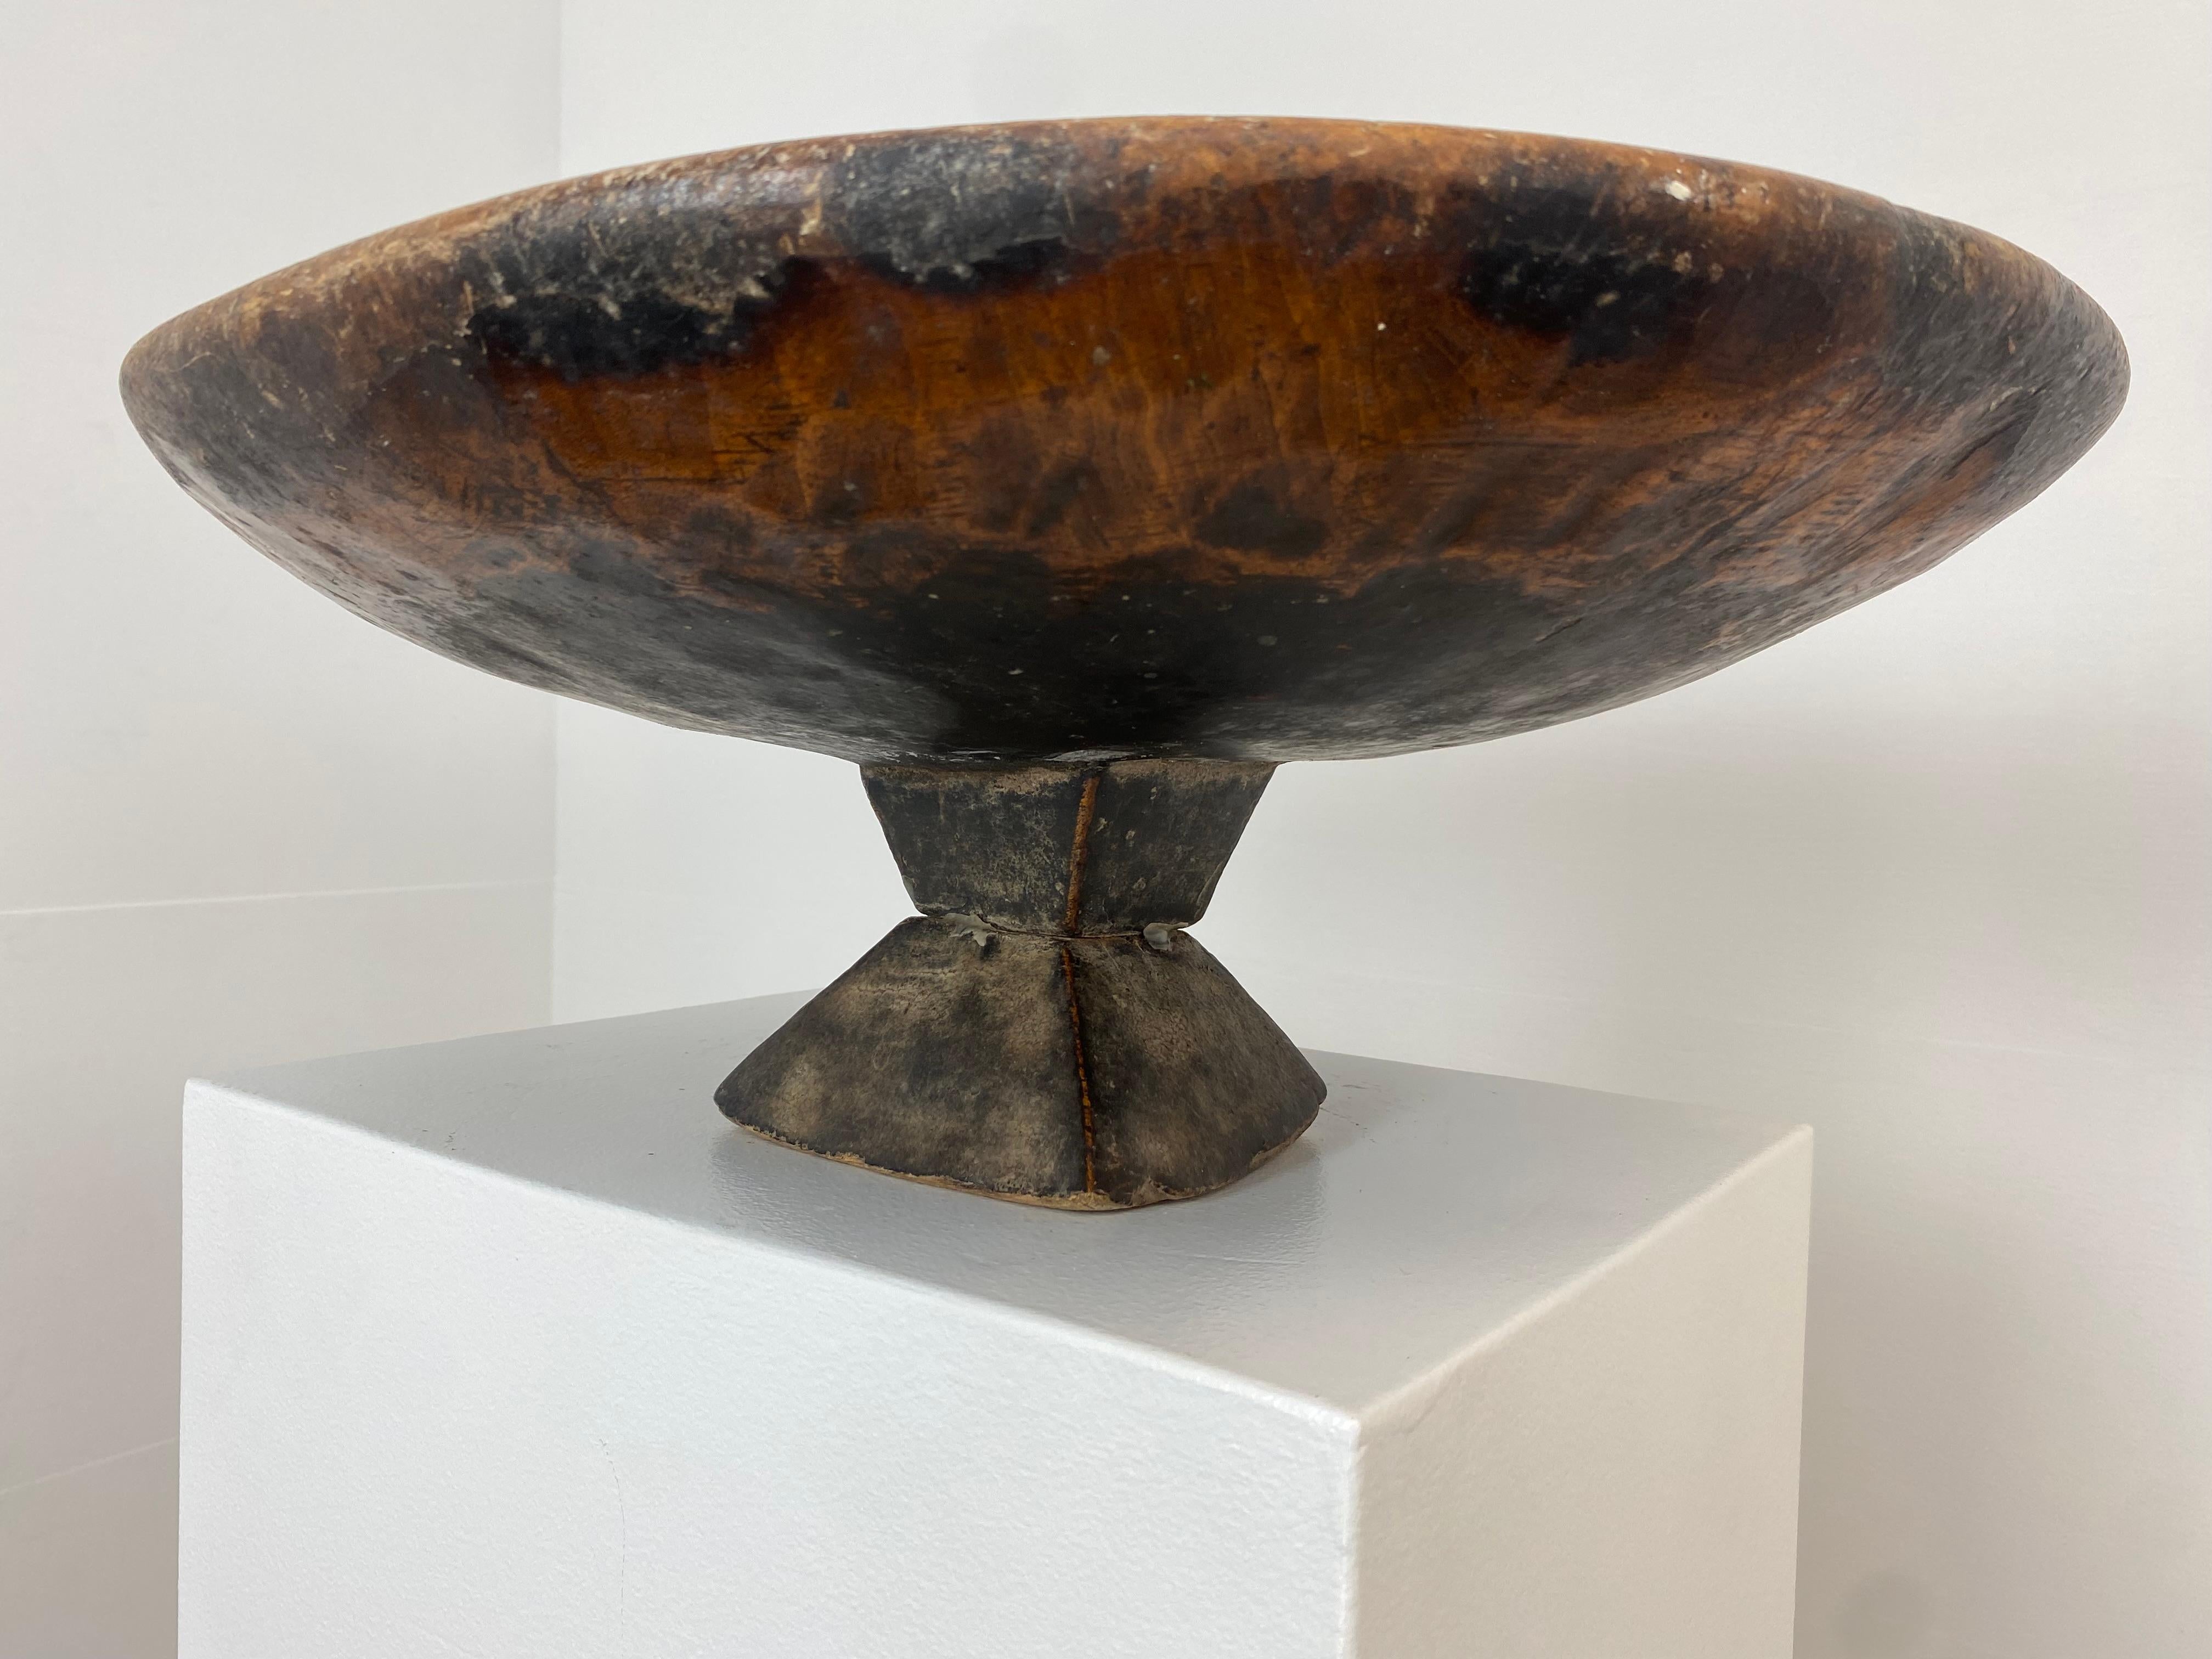 20th Century Antique wooden Berber Tazza on a central foot For Sale